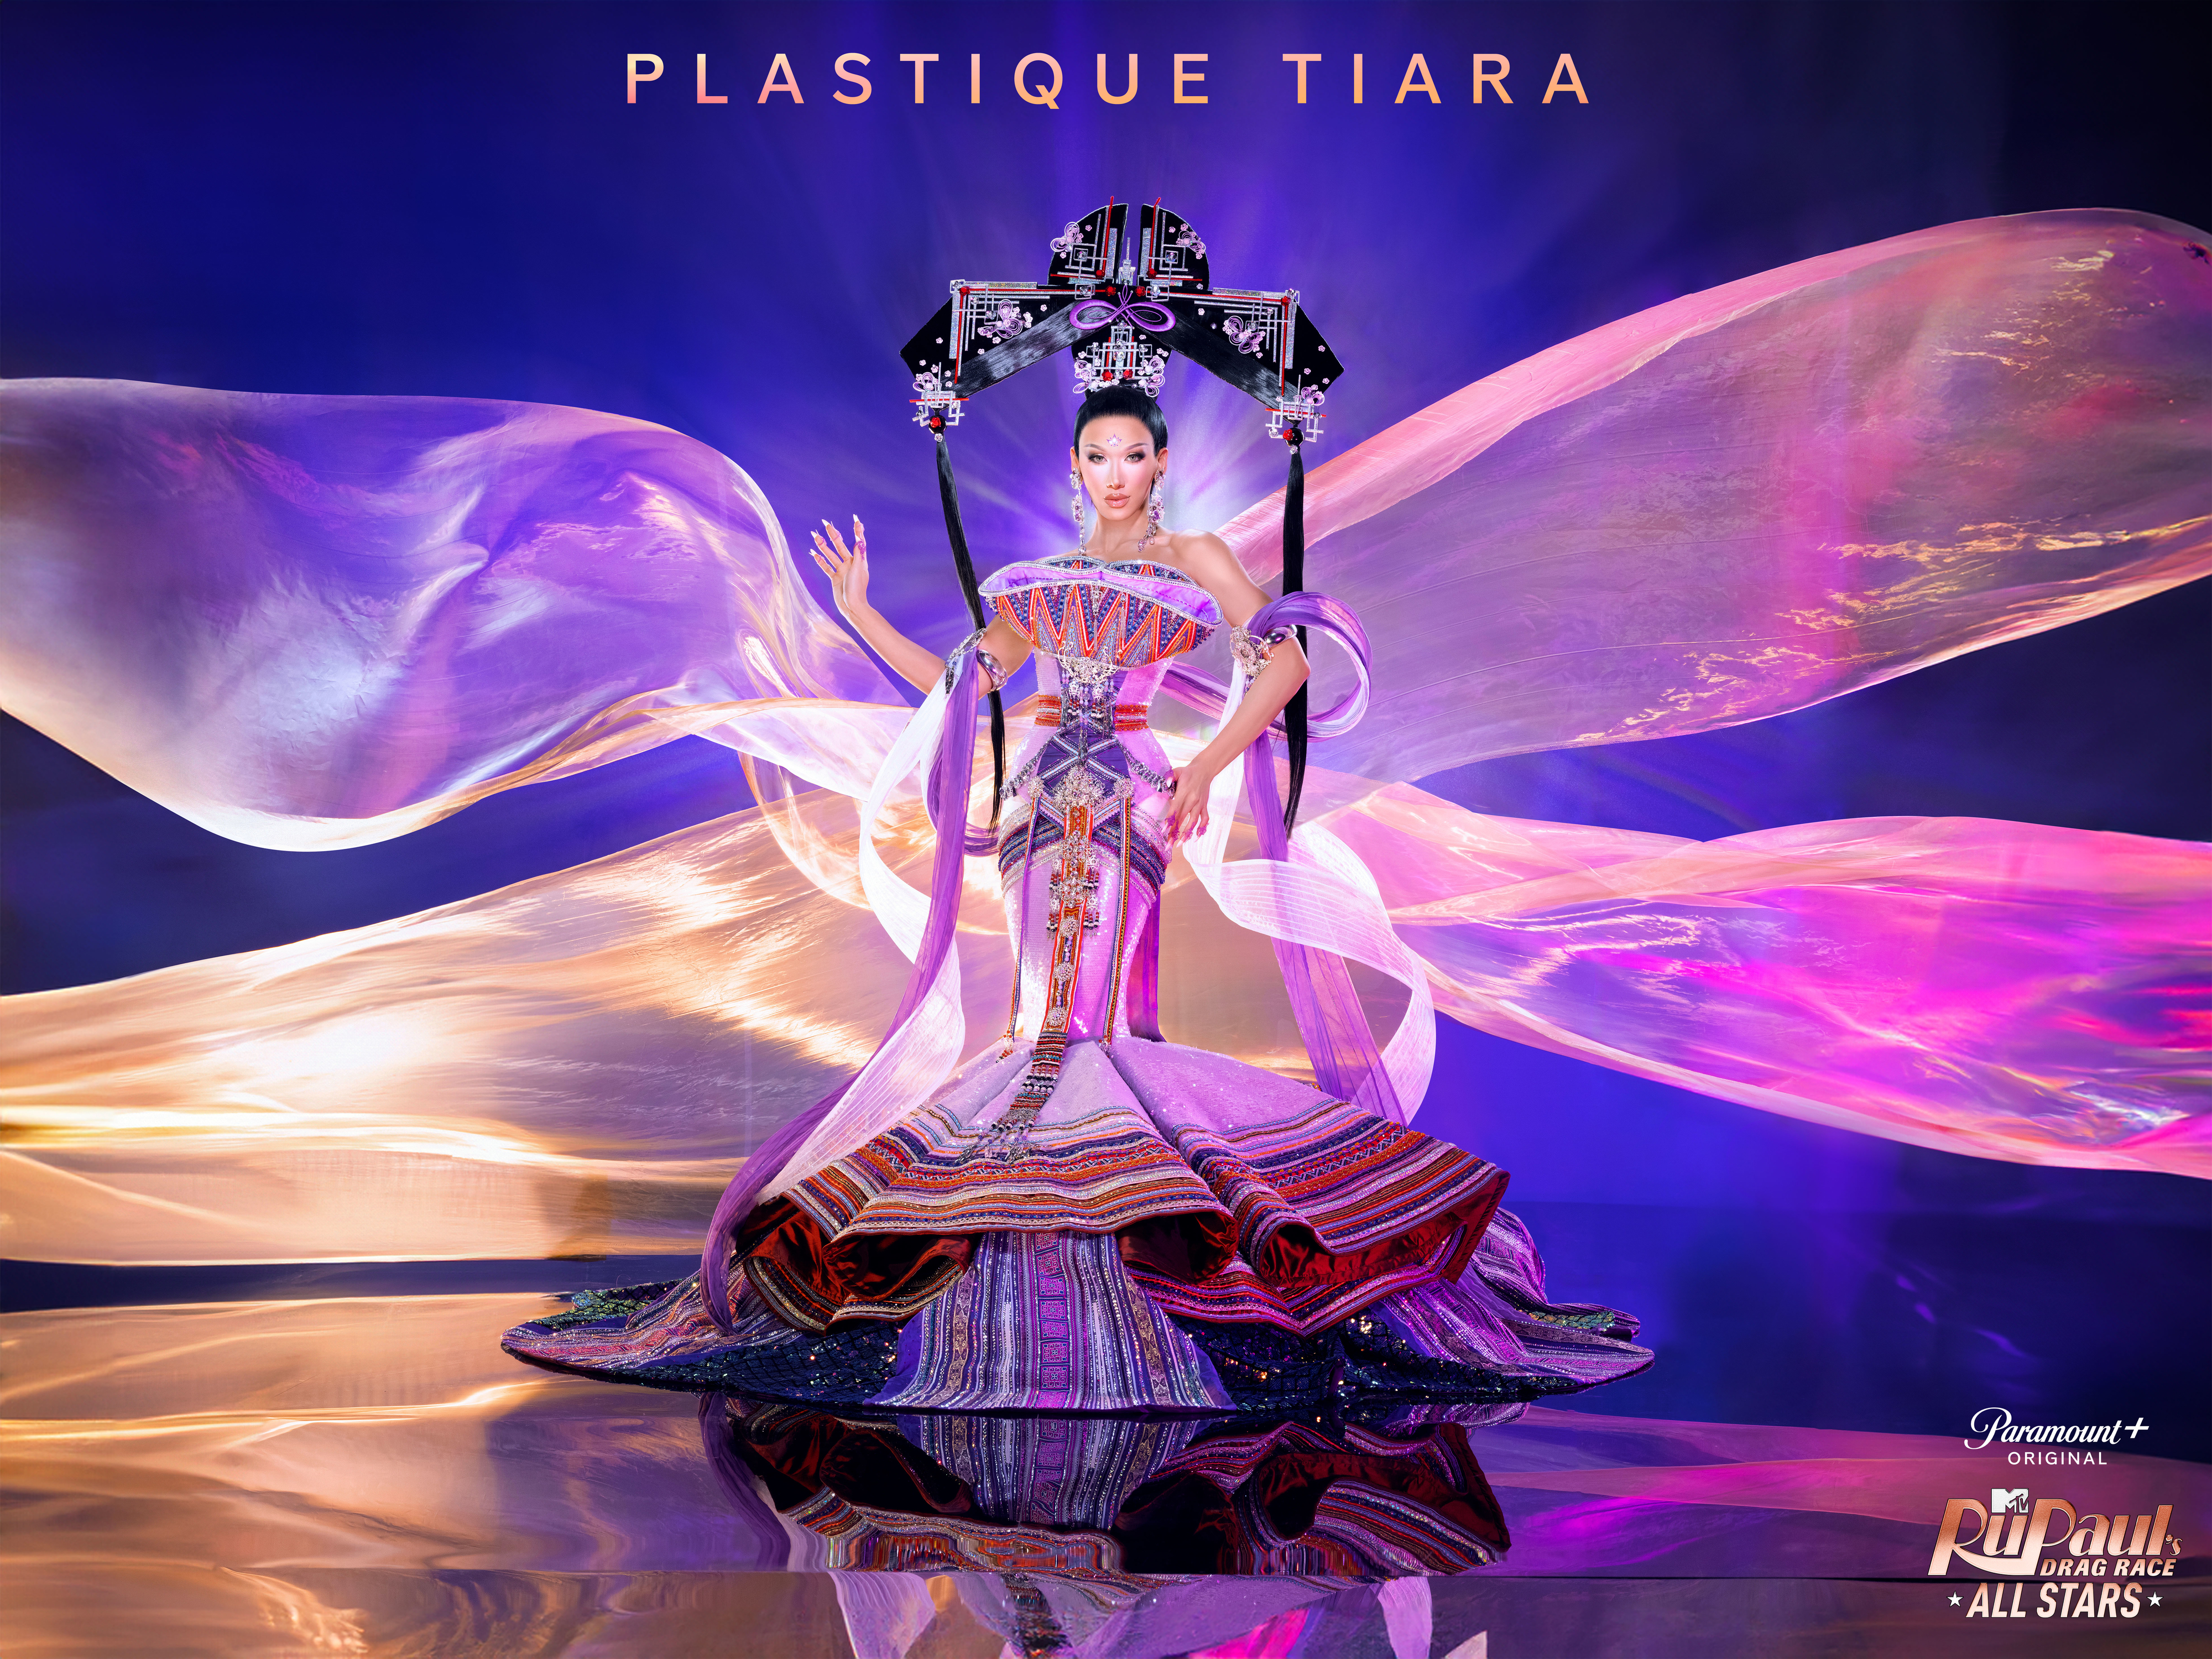 Plastique Tiara in an elaborate costume with flowing sleeves and a tiered skirt on a stage